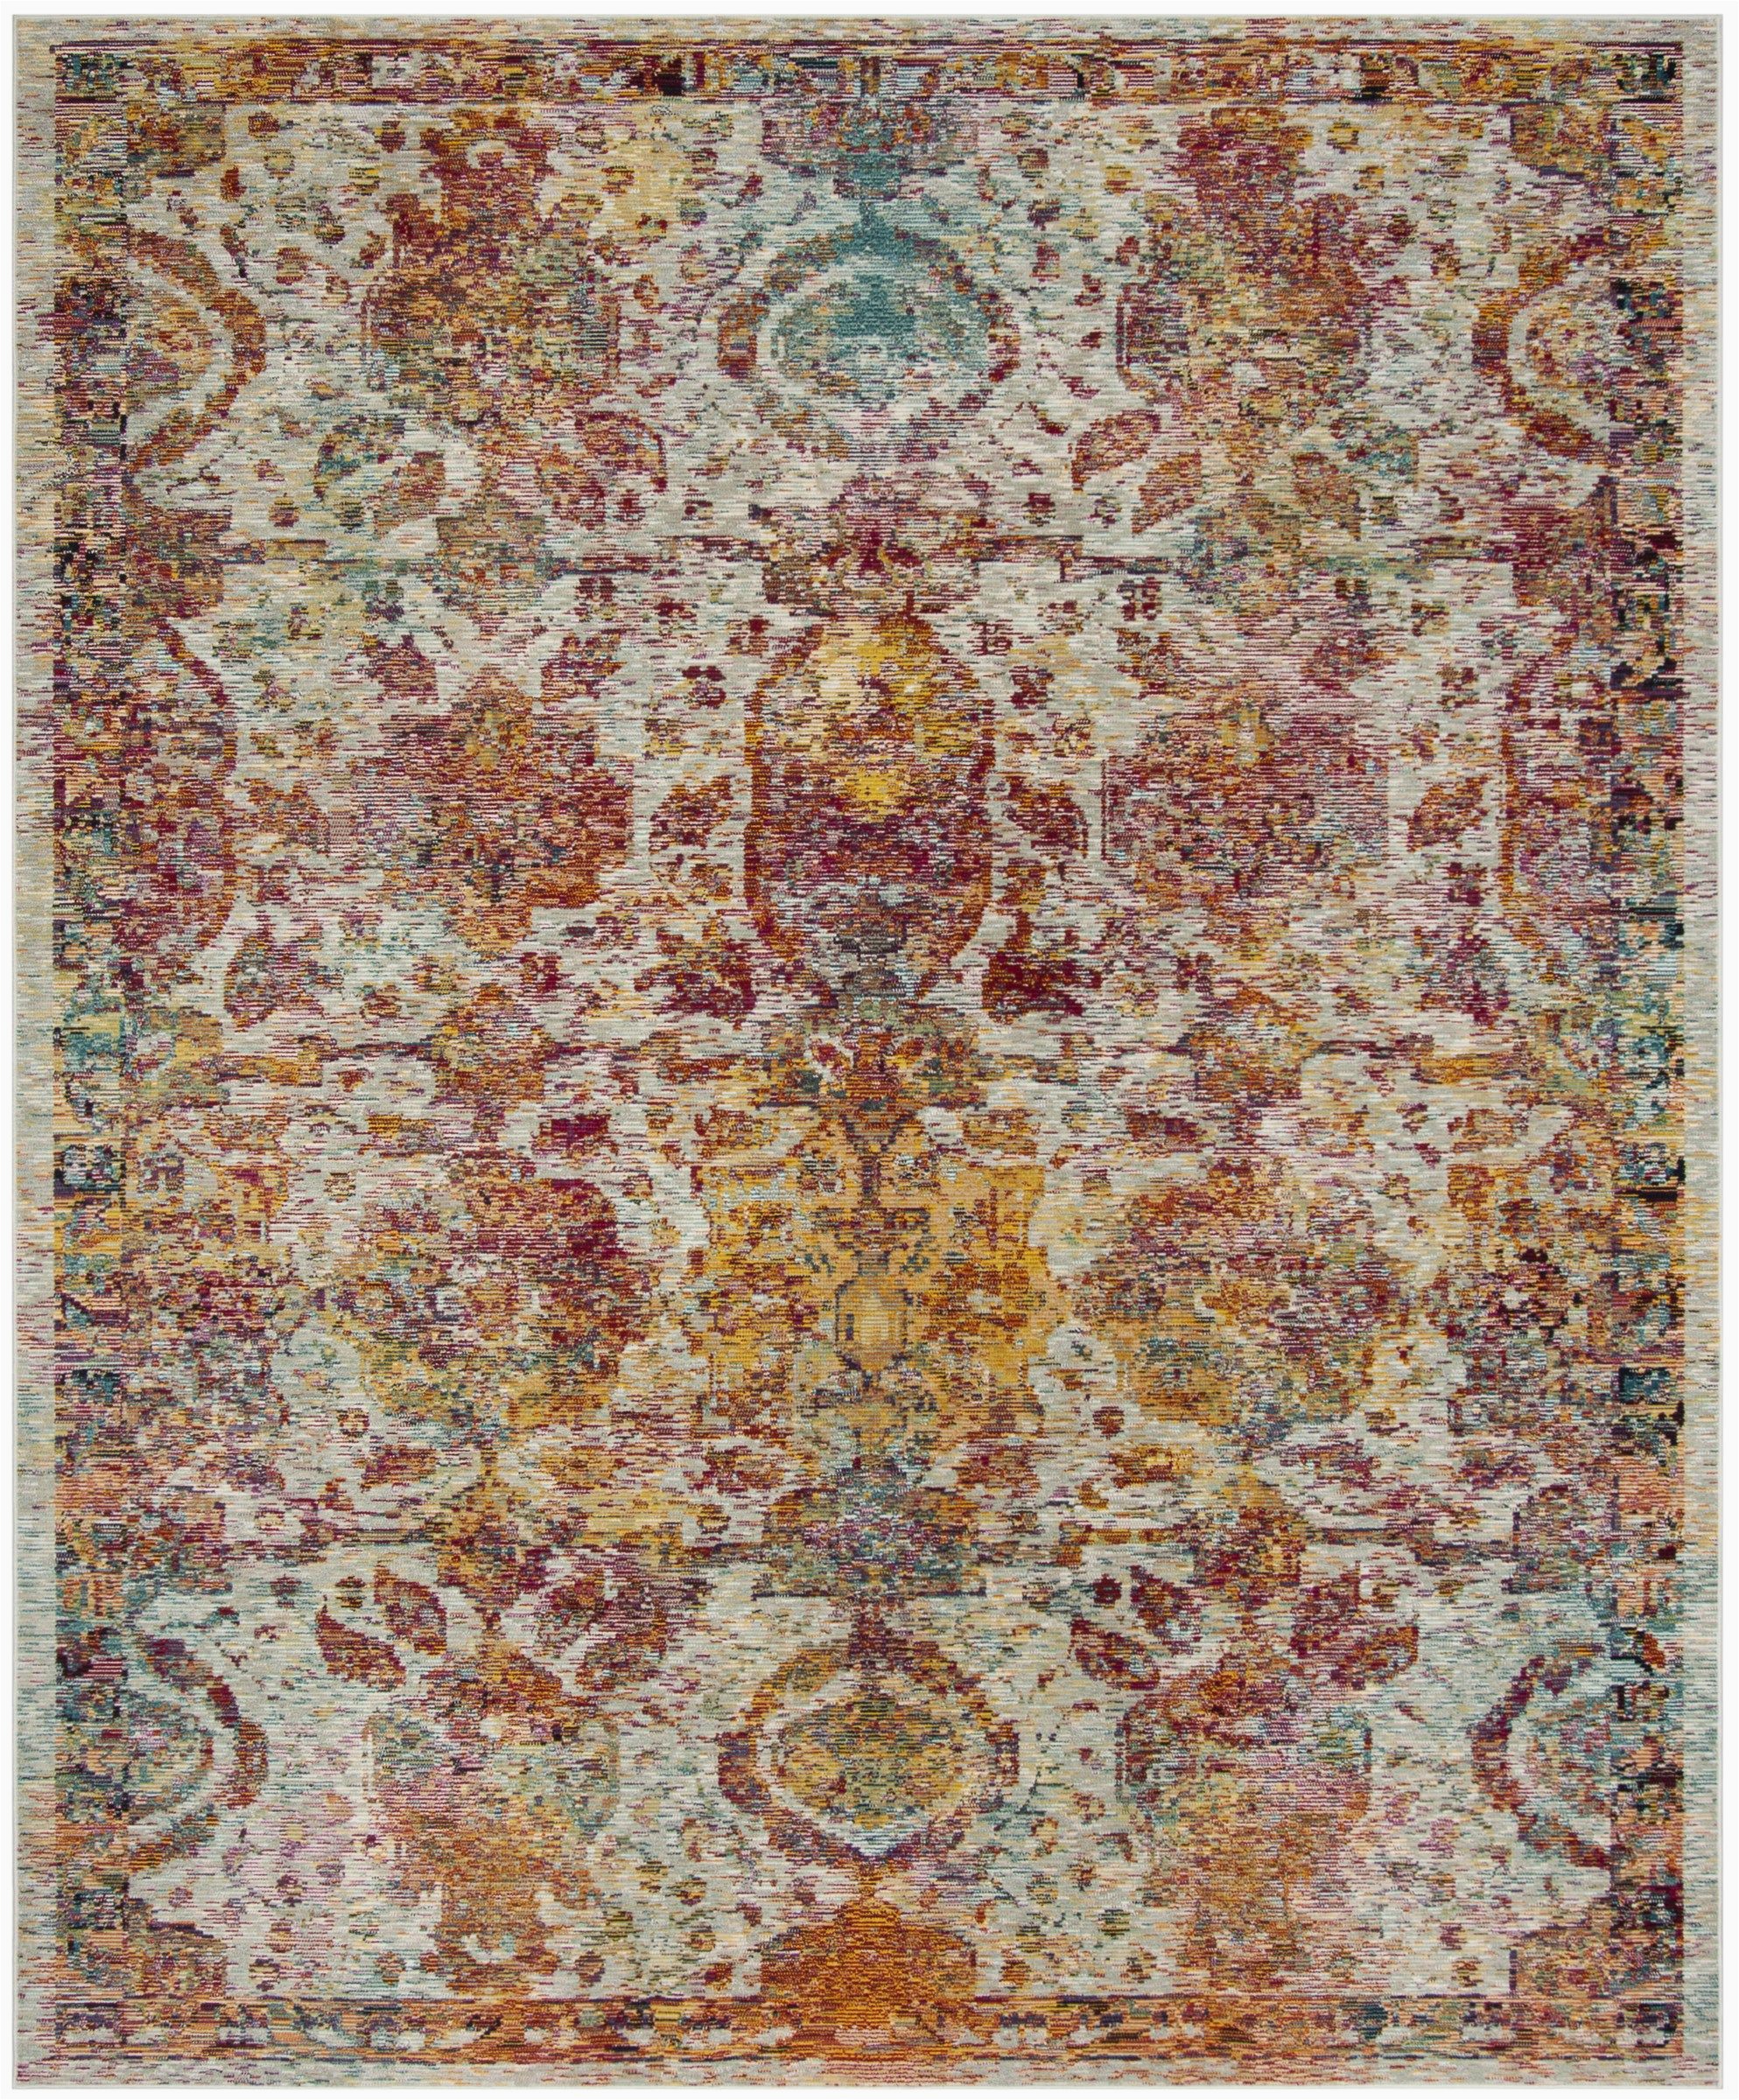 10 Foot by 12 Foot area Rugs Safavieh Crystal Collection Crs505 area Rug 8 Ft X 10 Ft